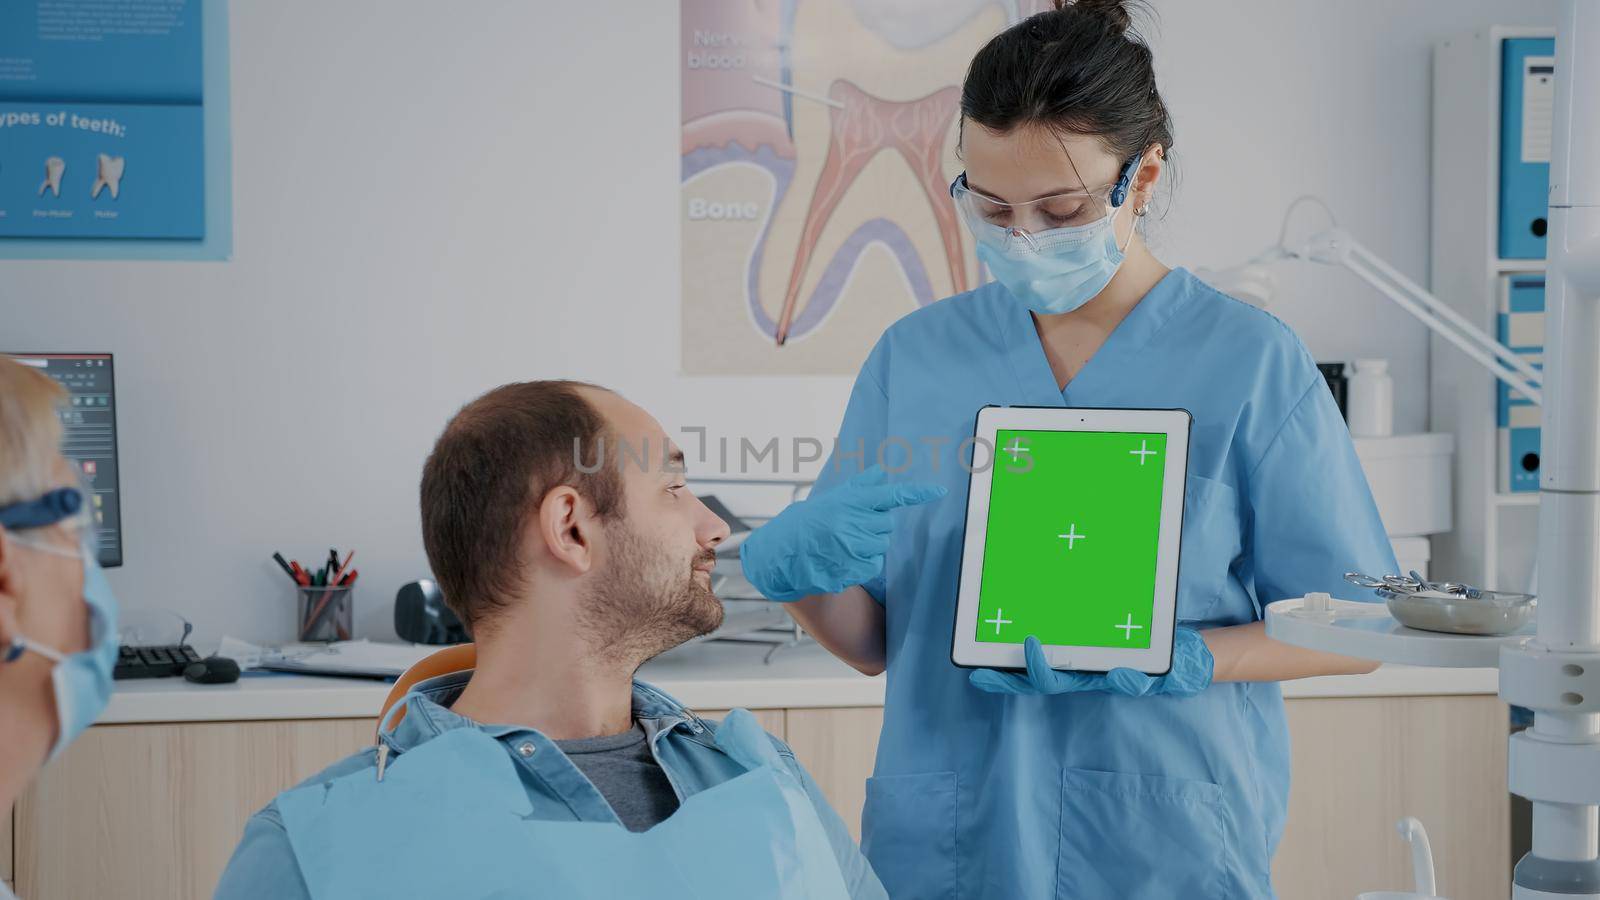 Assistant vertically holding digital tablet with green screen by DCStudio